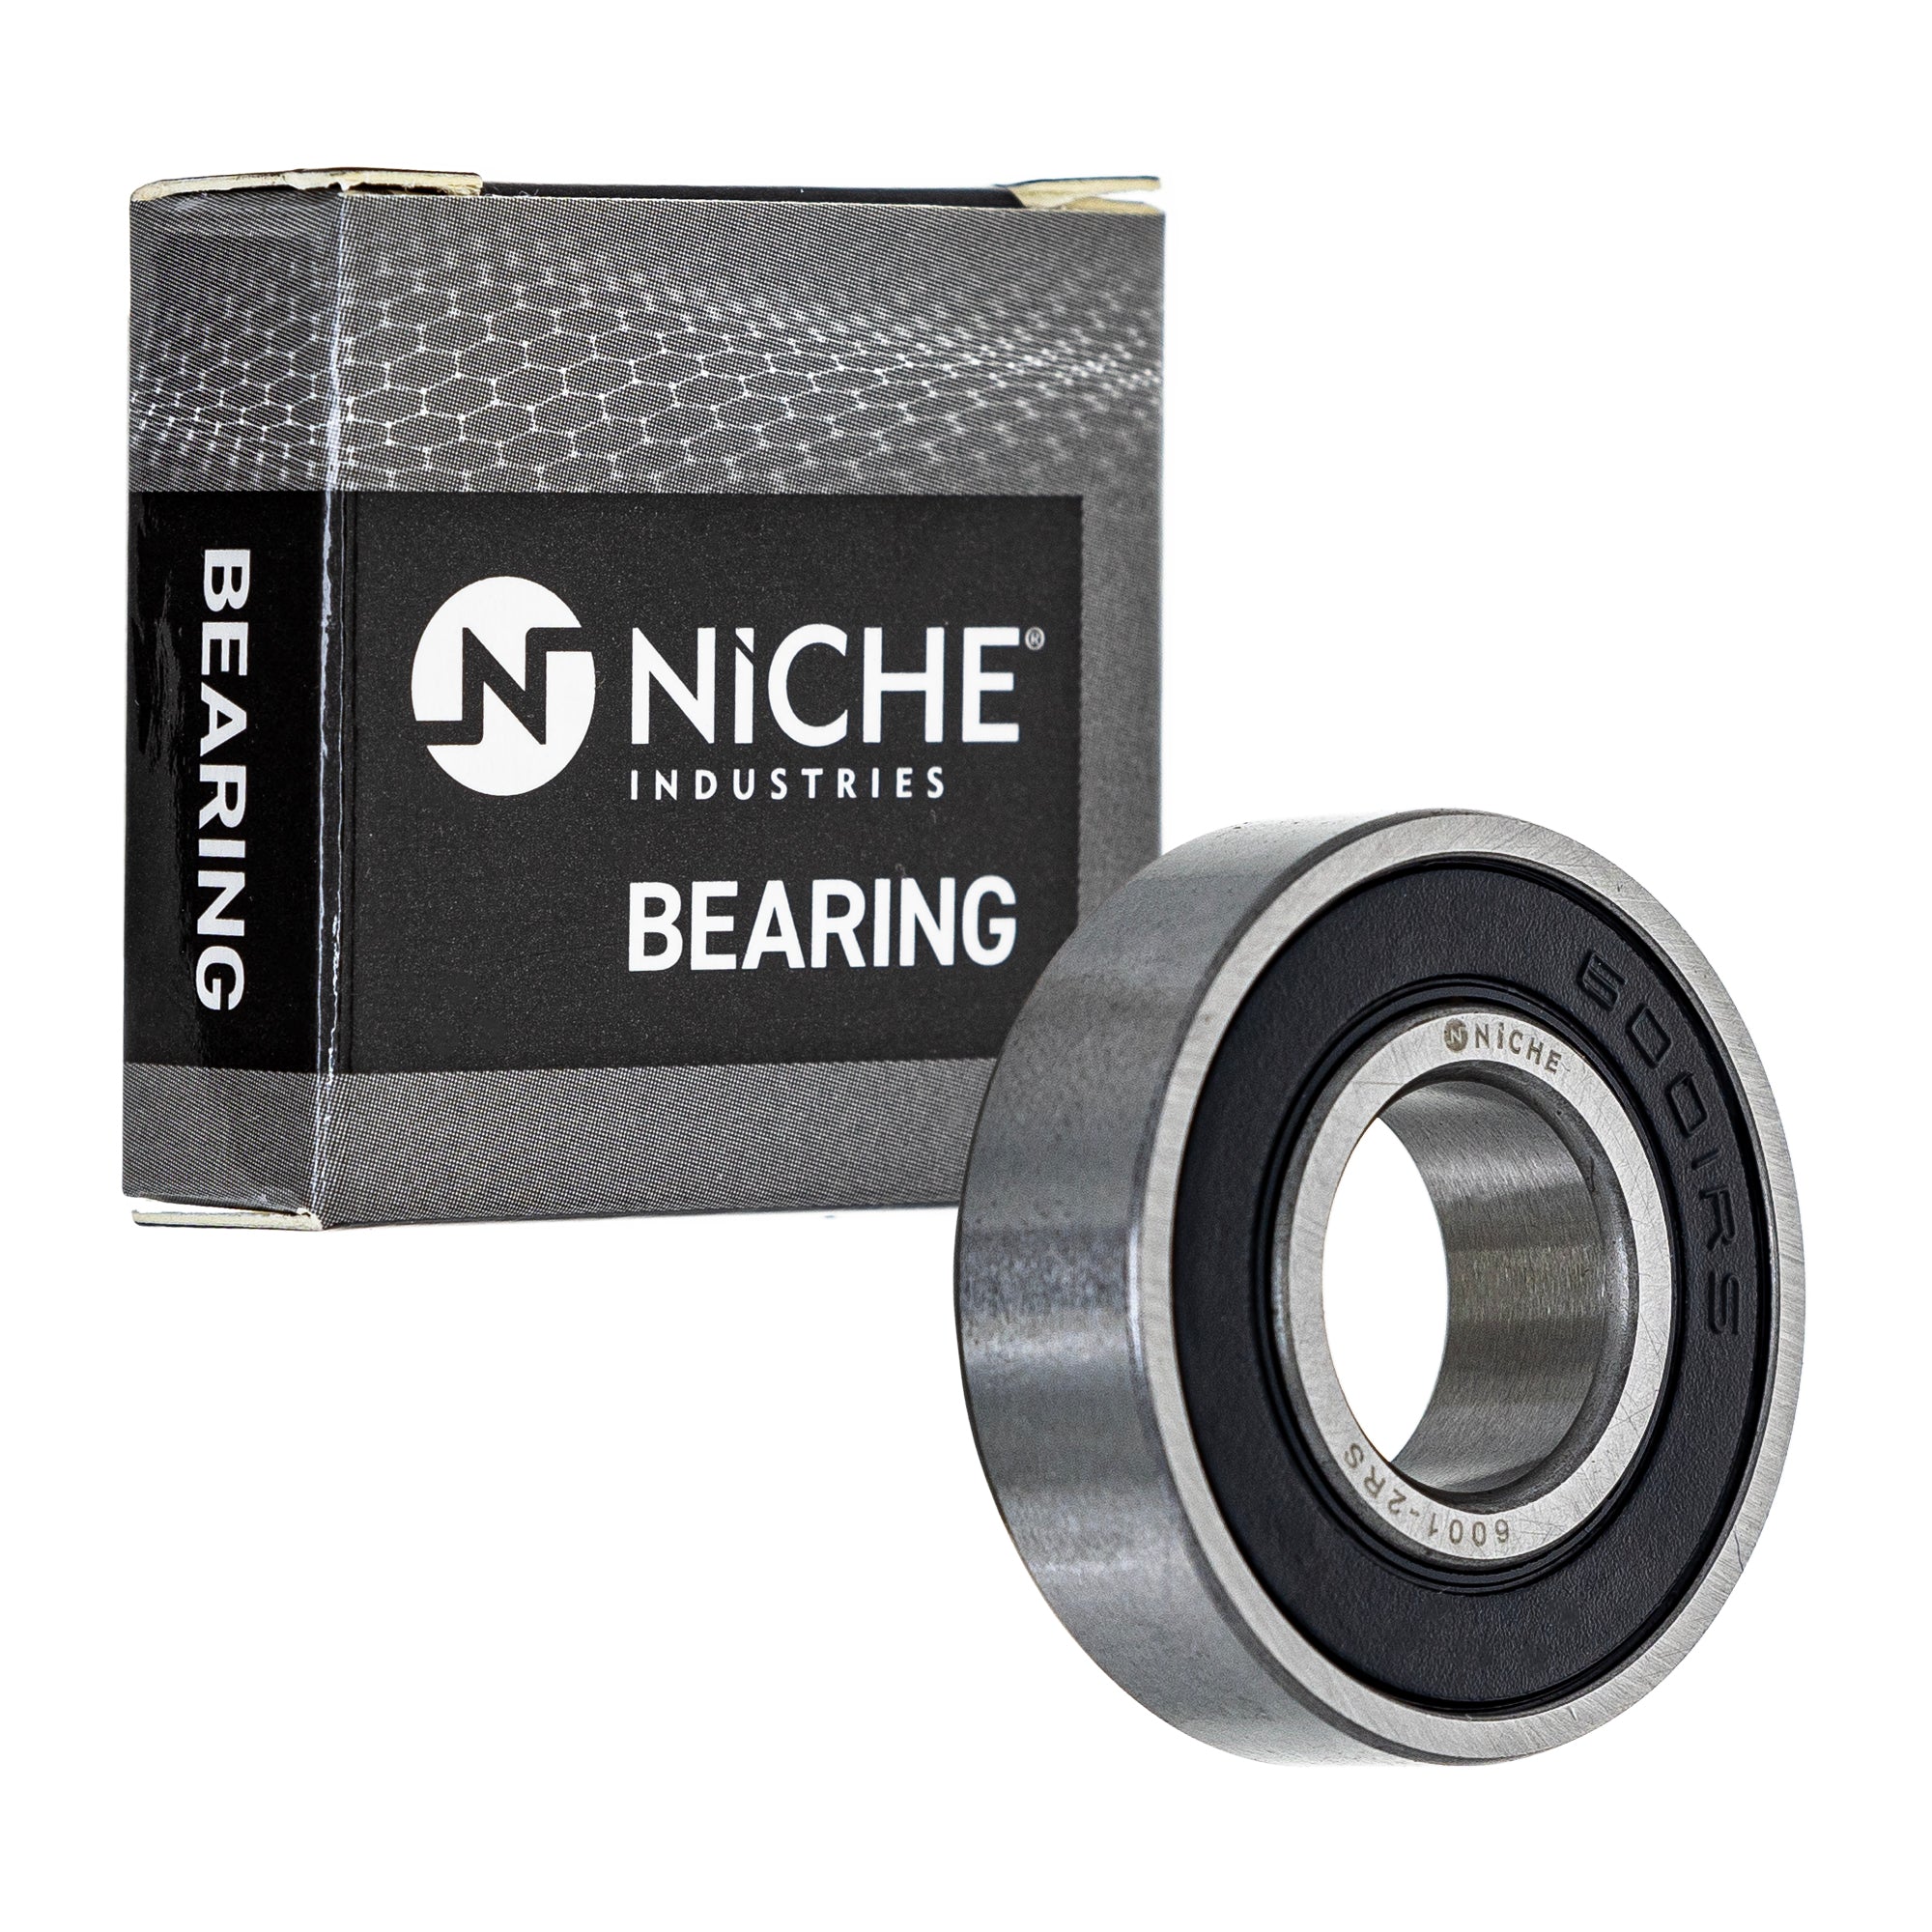 NICHE 519-CBB2257R Bearing for zOTHER YZ80 TTR125LE TTR125